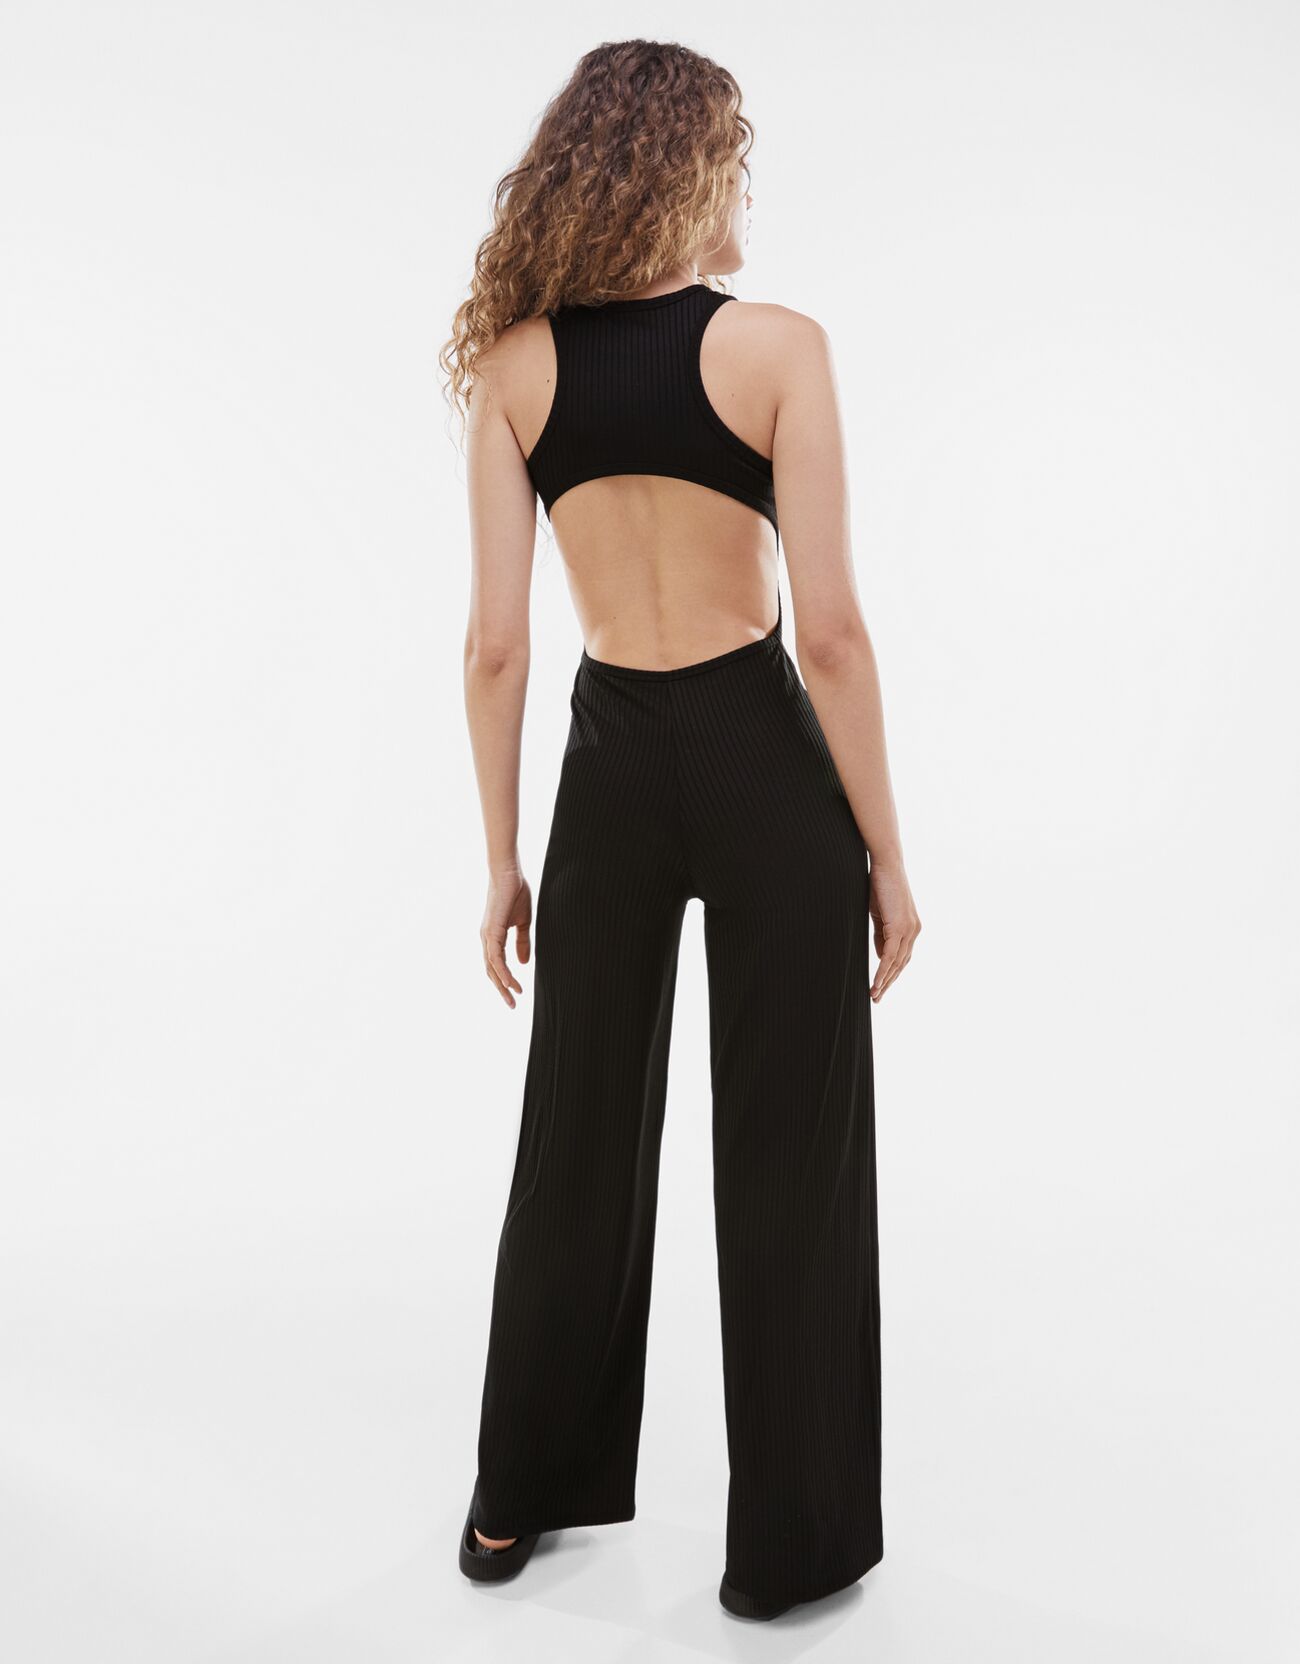 ASOS DESIGN high neck jumpsuit with cut out back in black | ASOS